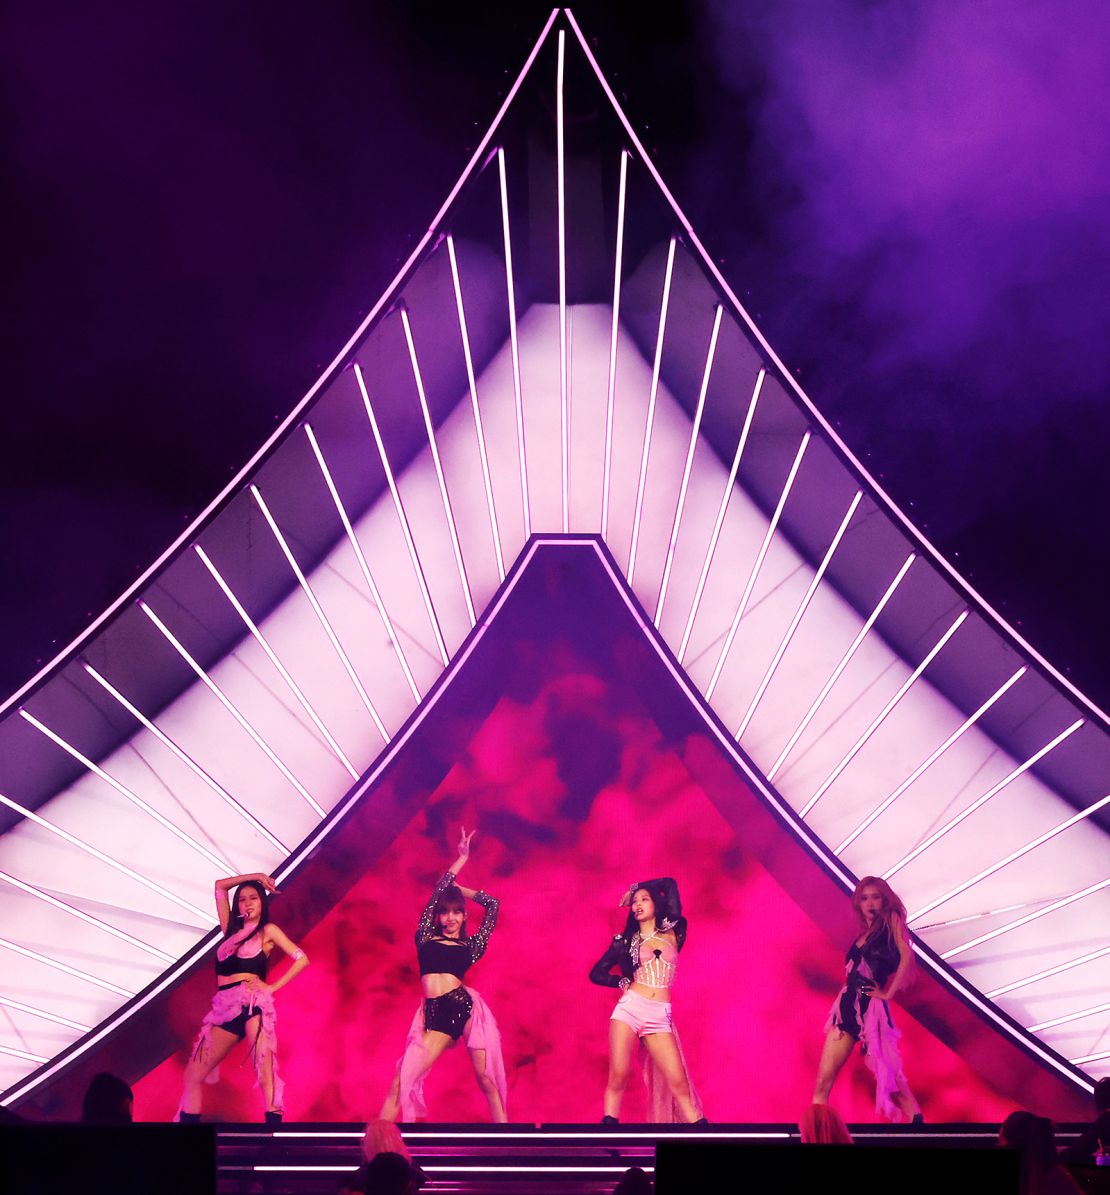 The stage design was a further acknowledgment of Korean heritage.